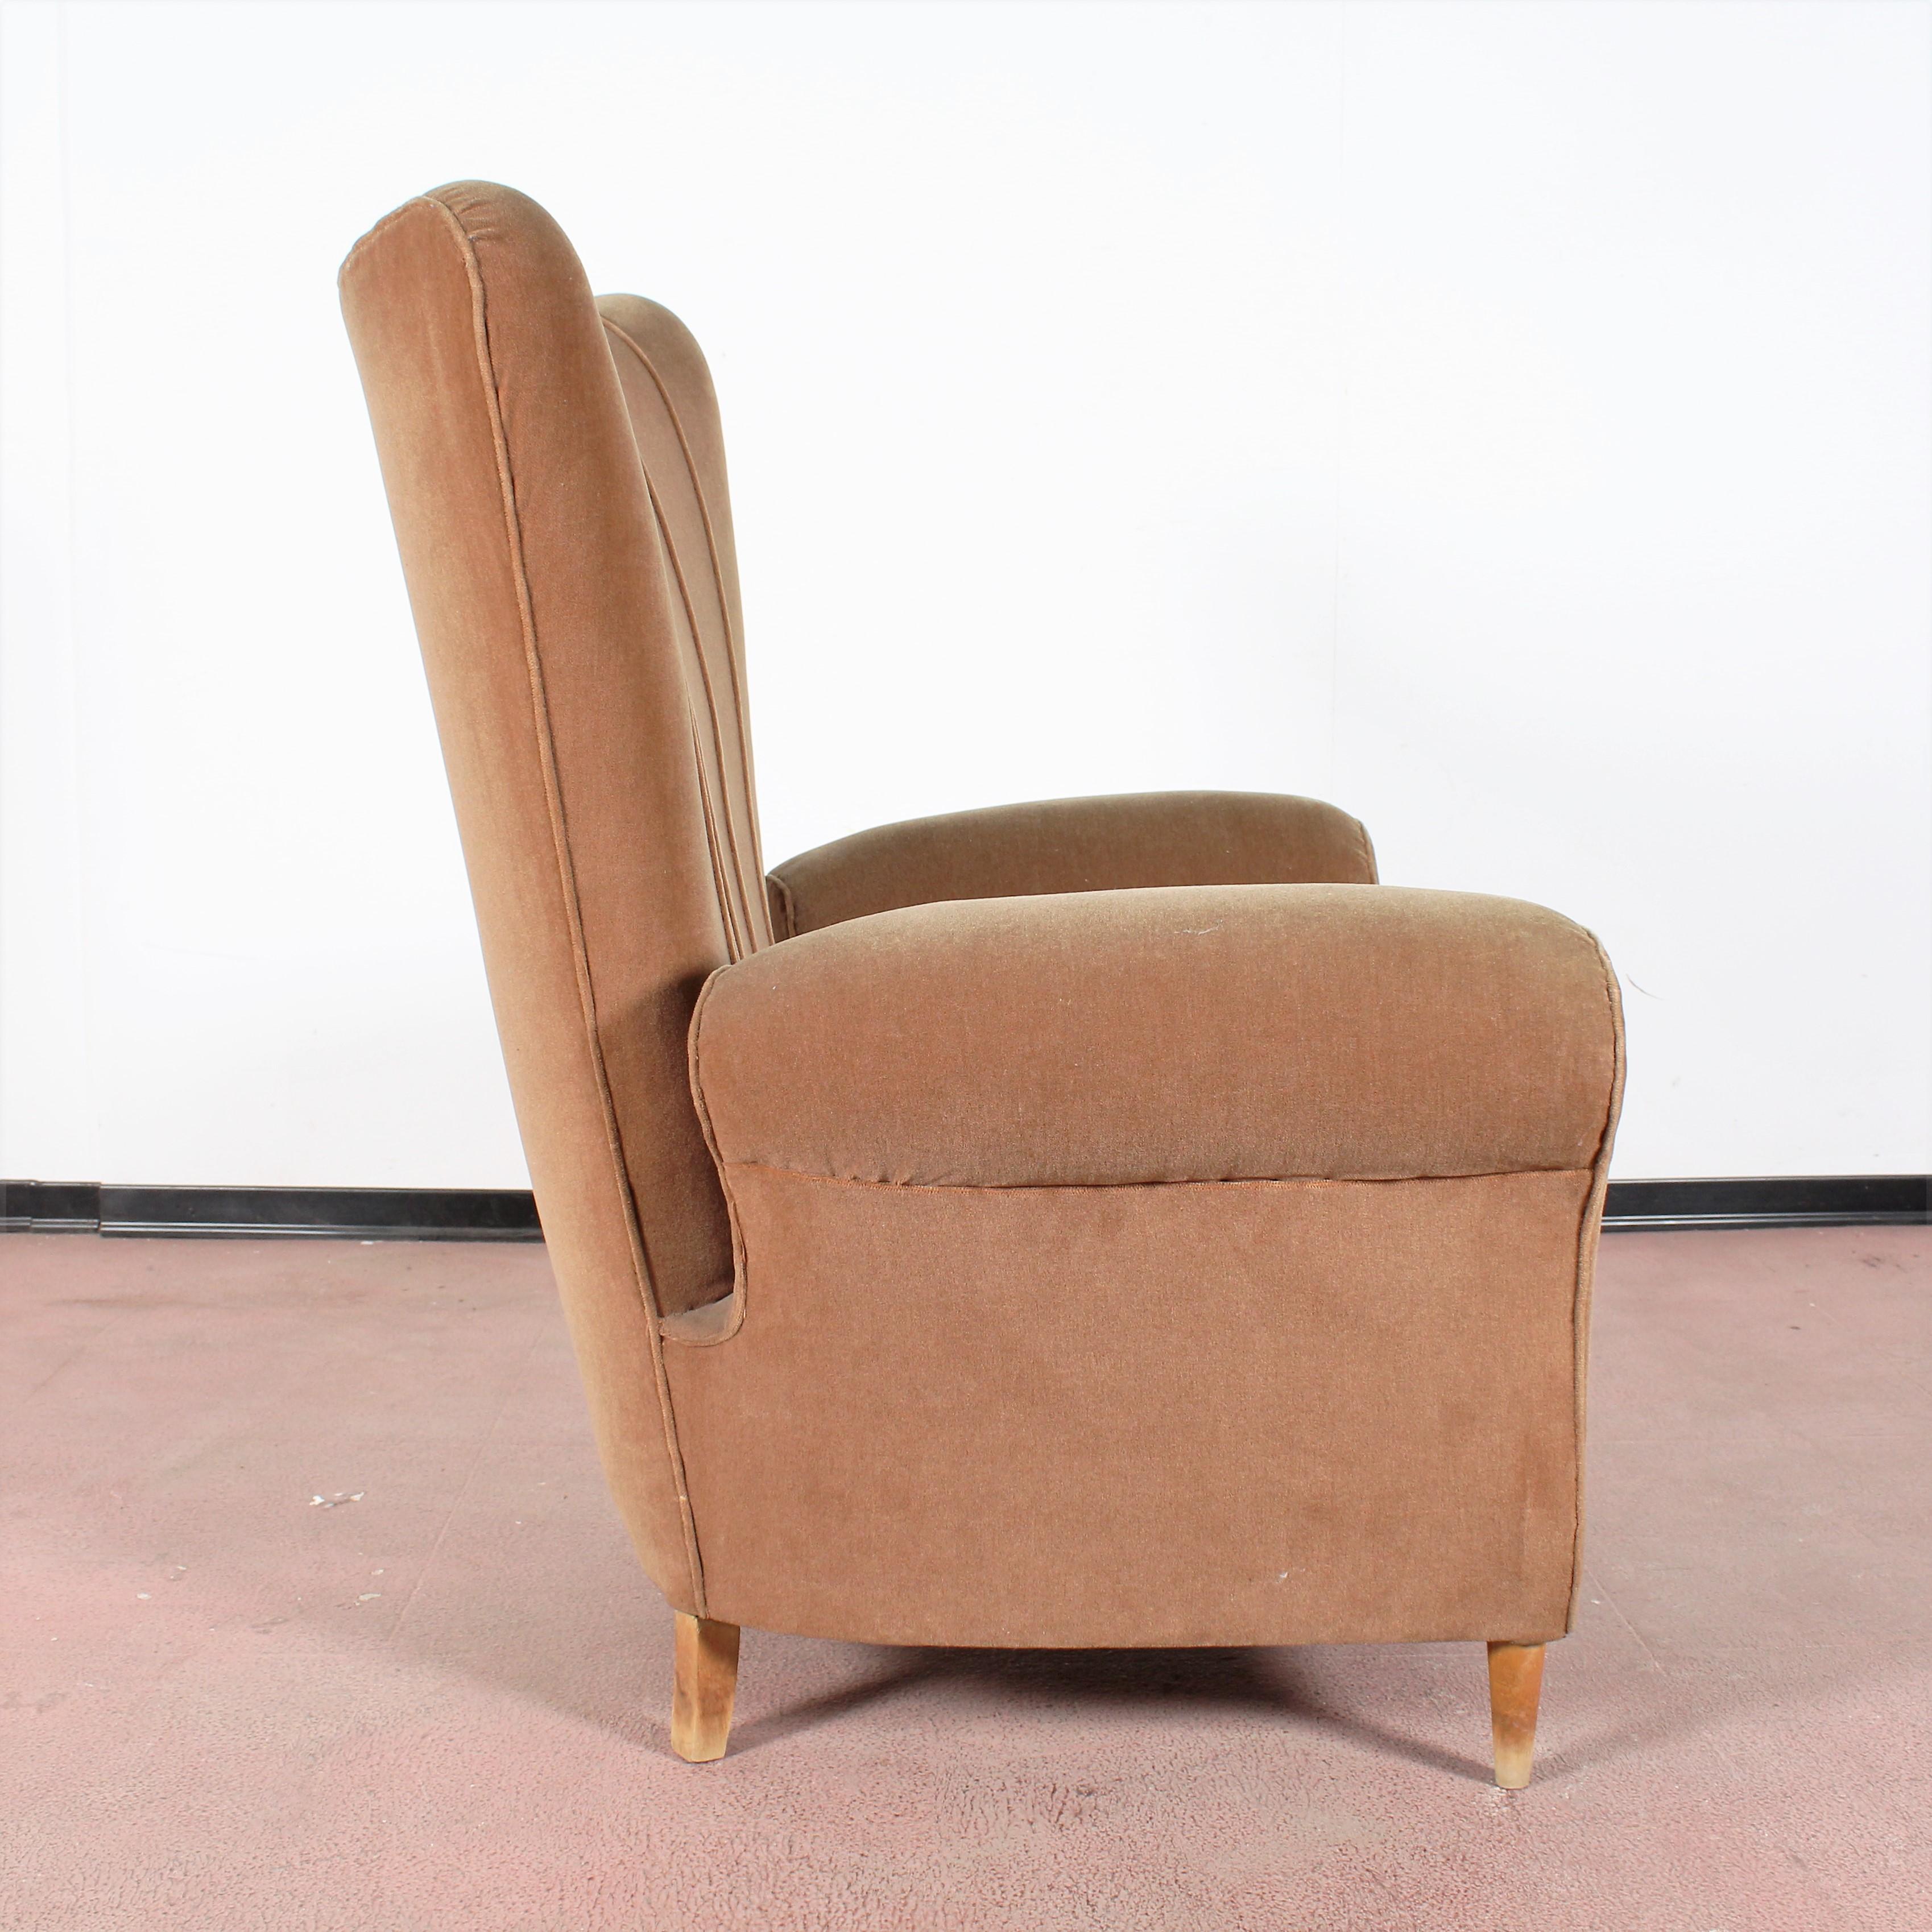 Mid-20th Century Melchiorre Bega Midcentury Camel-Colored Wool Velvet Armchair, 1950s, Italy